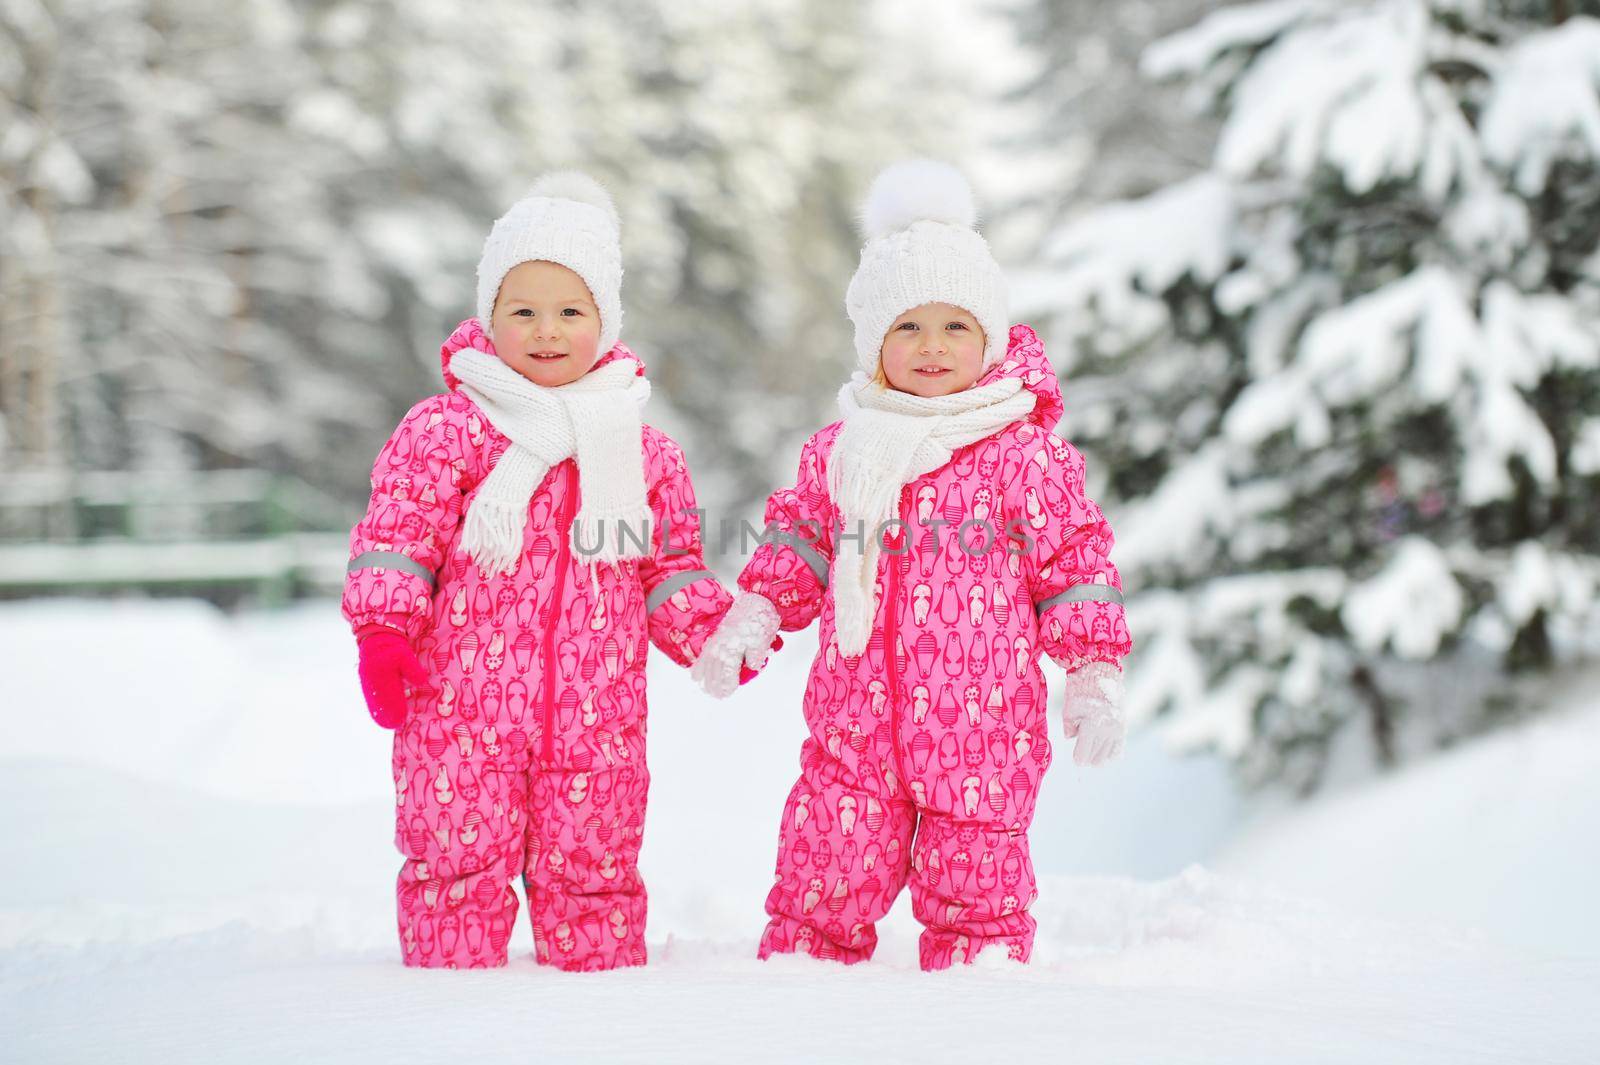 Two little twin girls in red suits stand in a snowy winter forest by Lobachad